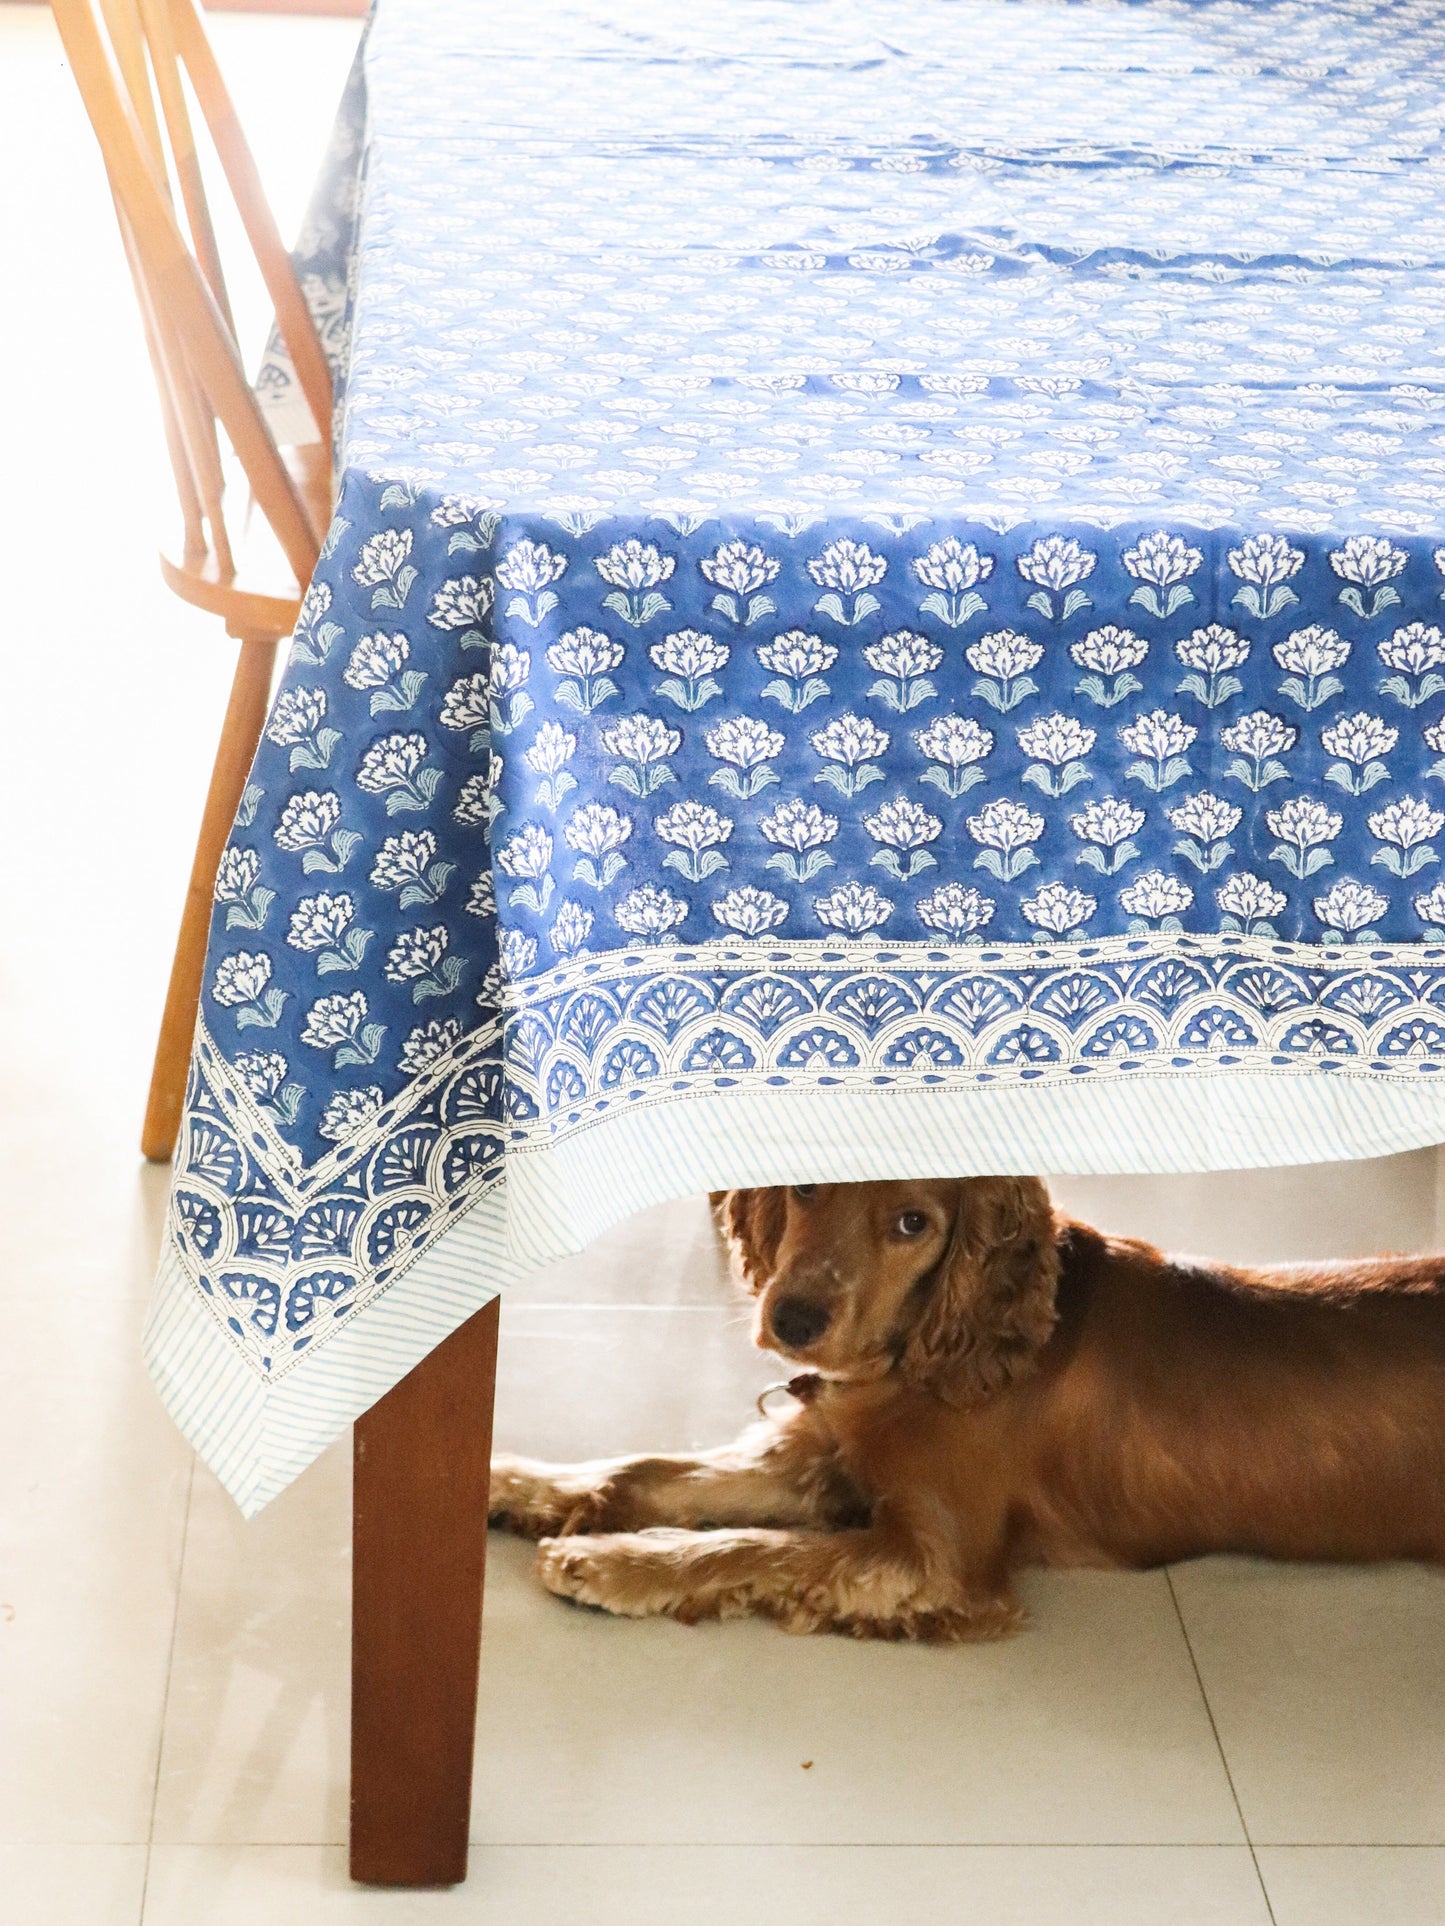 8 seater tablecloth - Blue boota tablecloth - block print table cloth - Navy blue table cover - large table size tablecloth - 60x120 inches